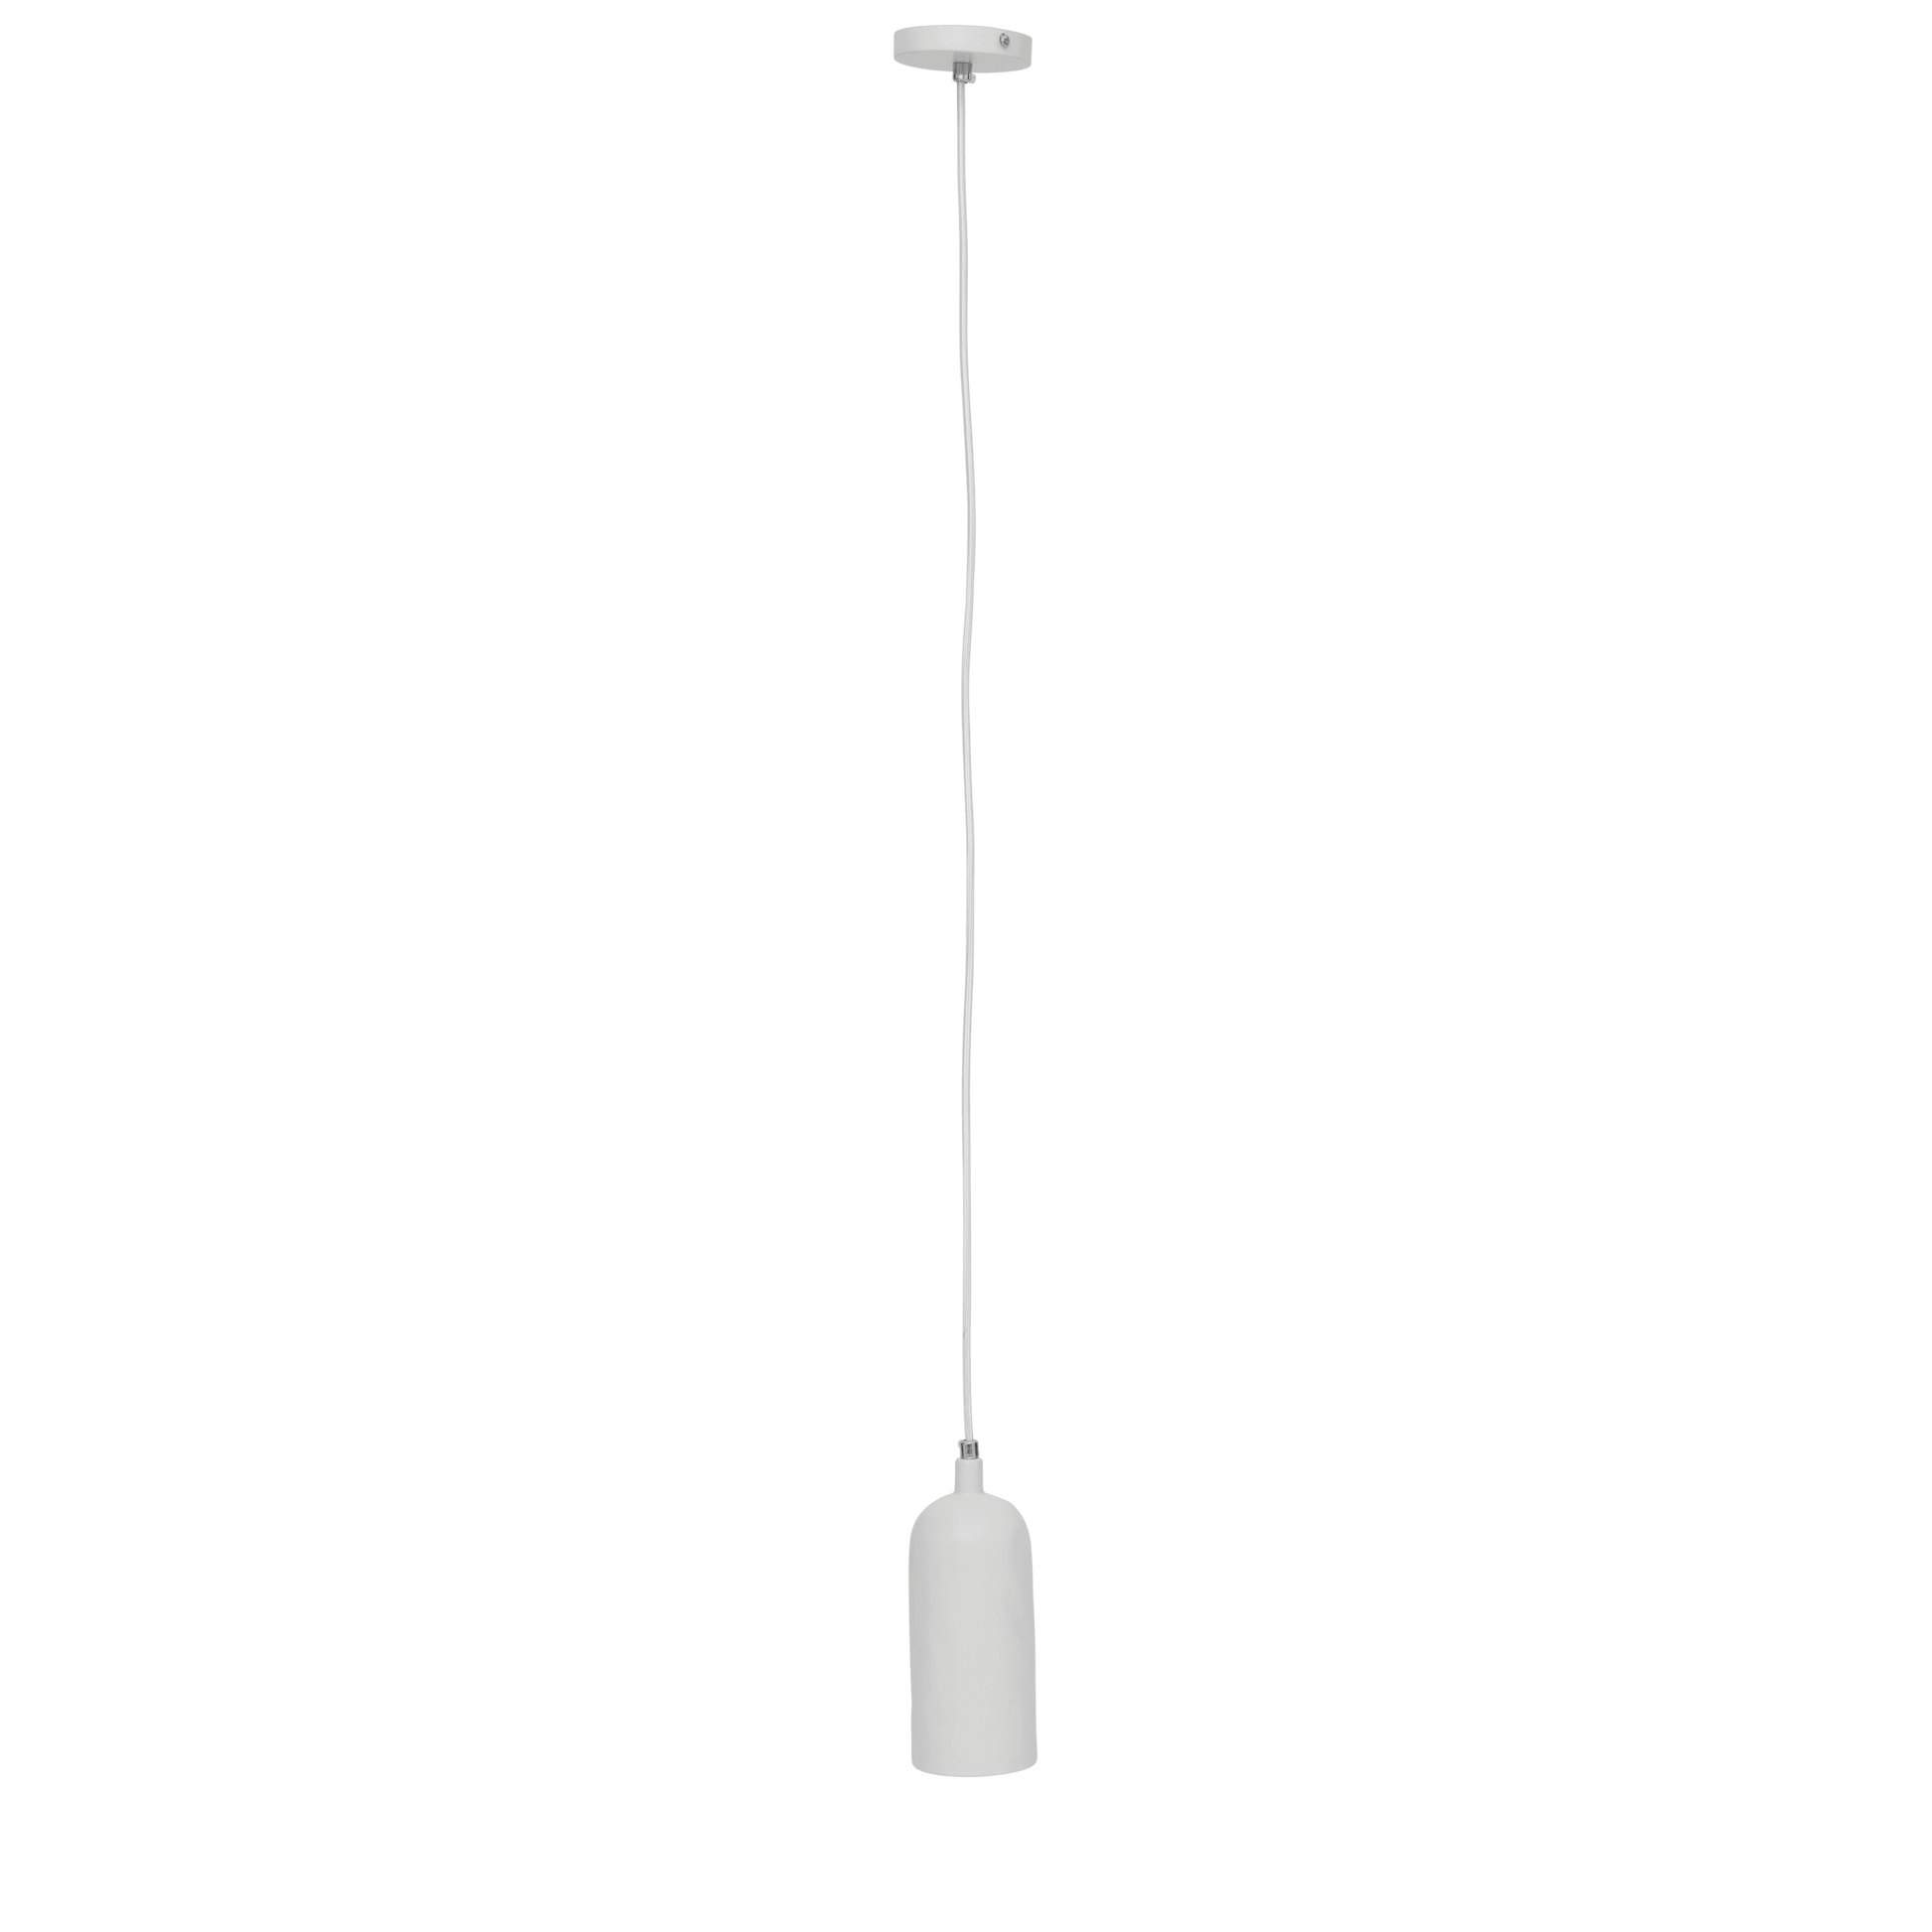 Hanging lamp Tiny off white - Urban Nature Culture